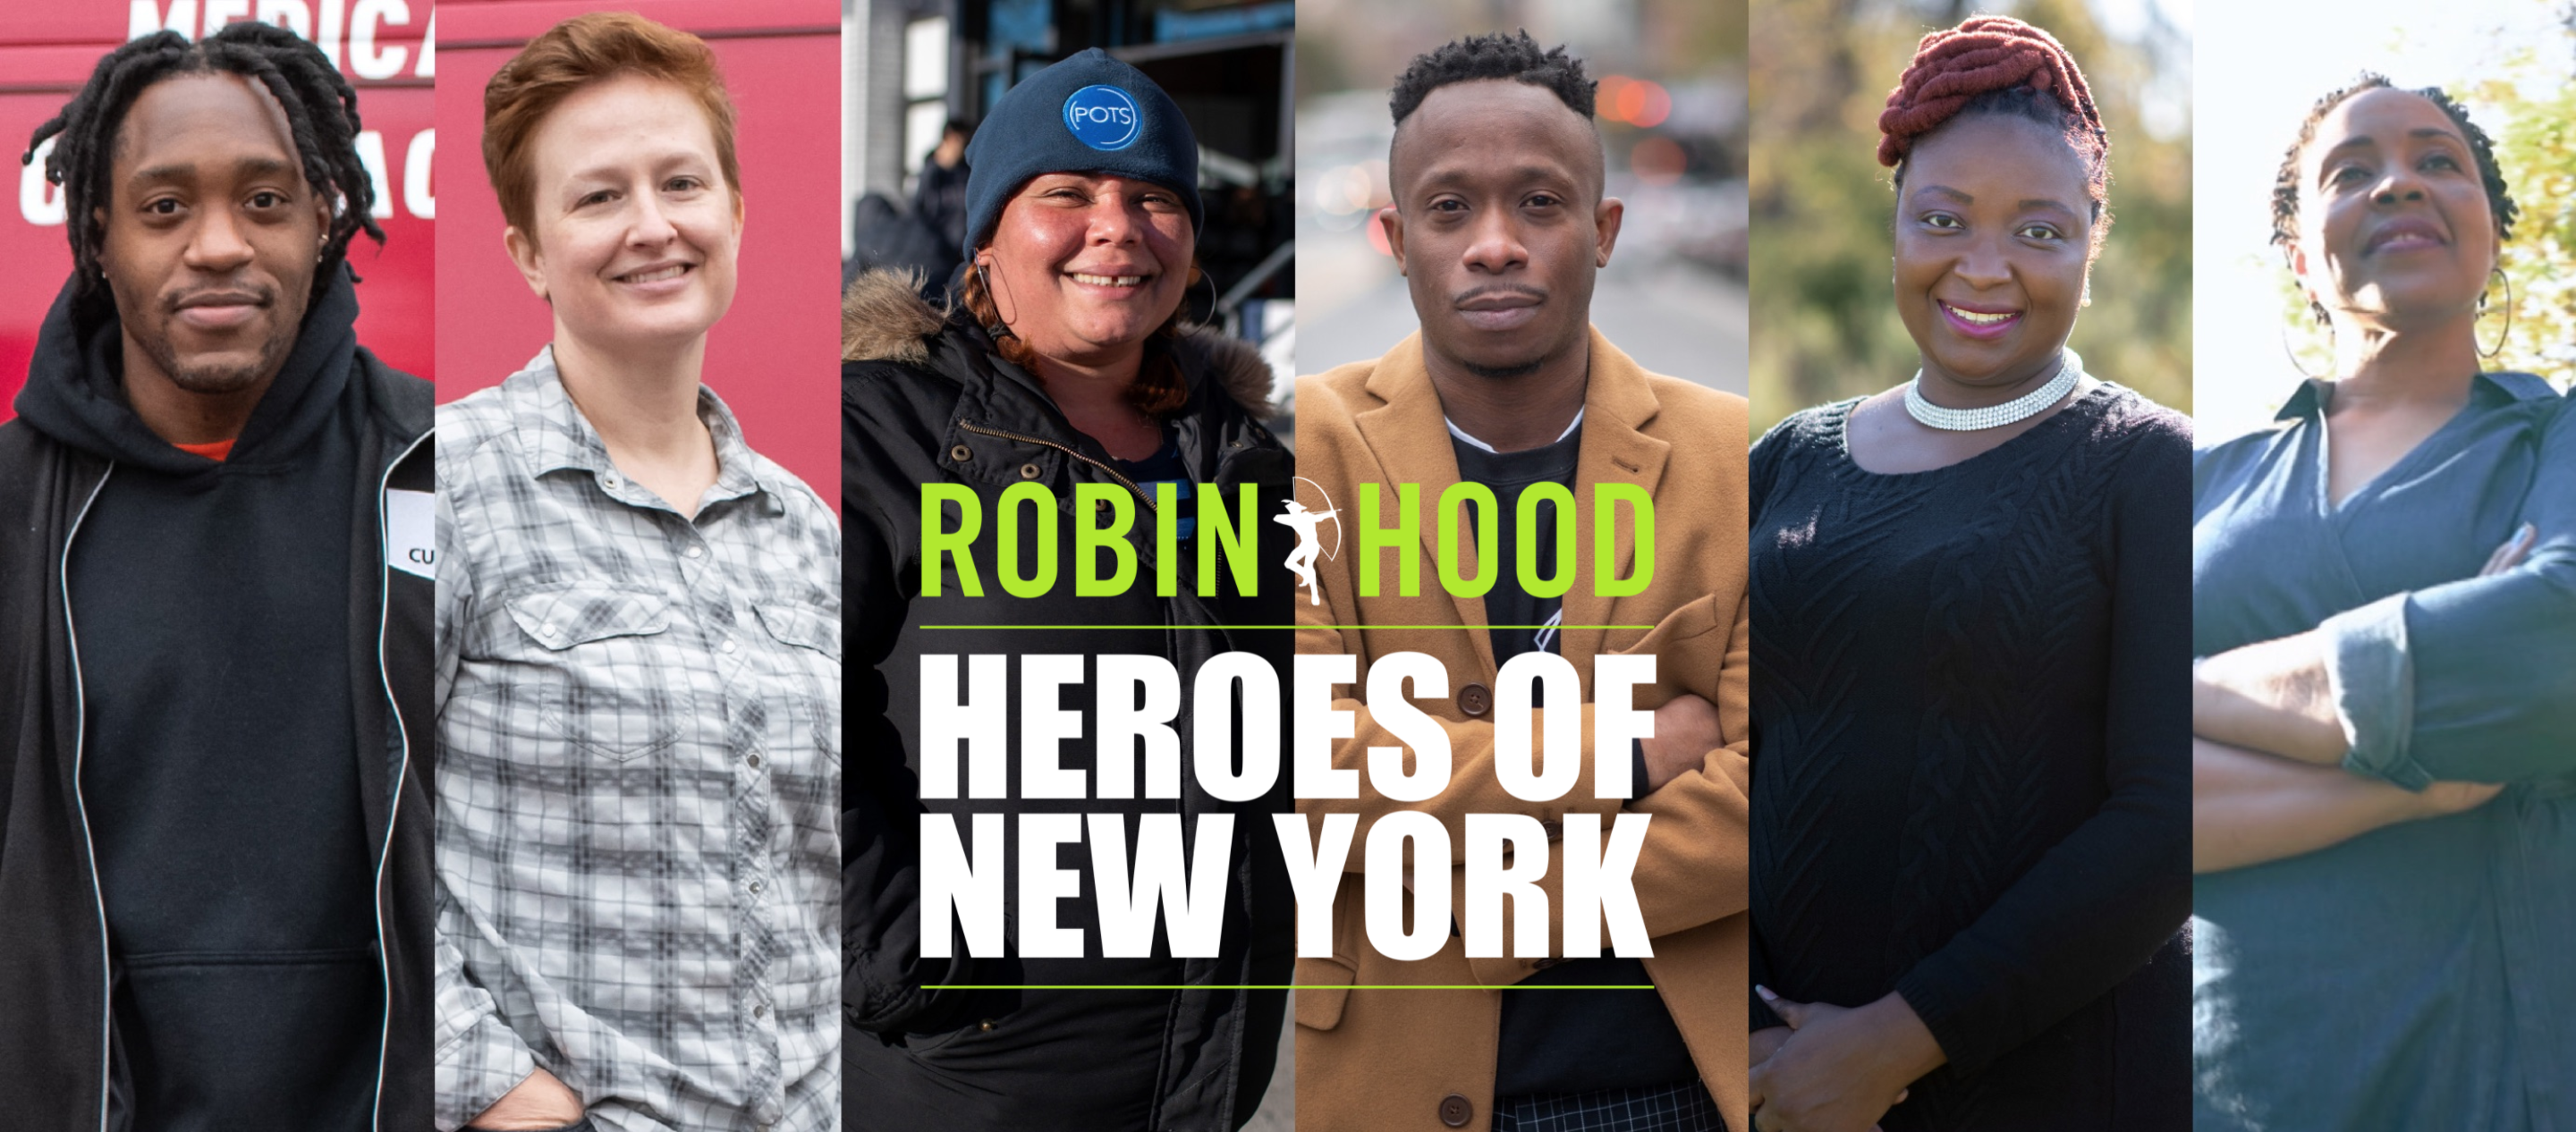 Some of Robin Hood's recent Heroes of New York